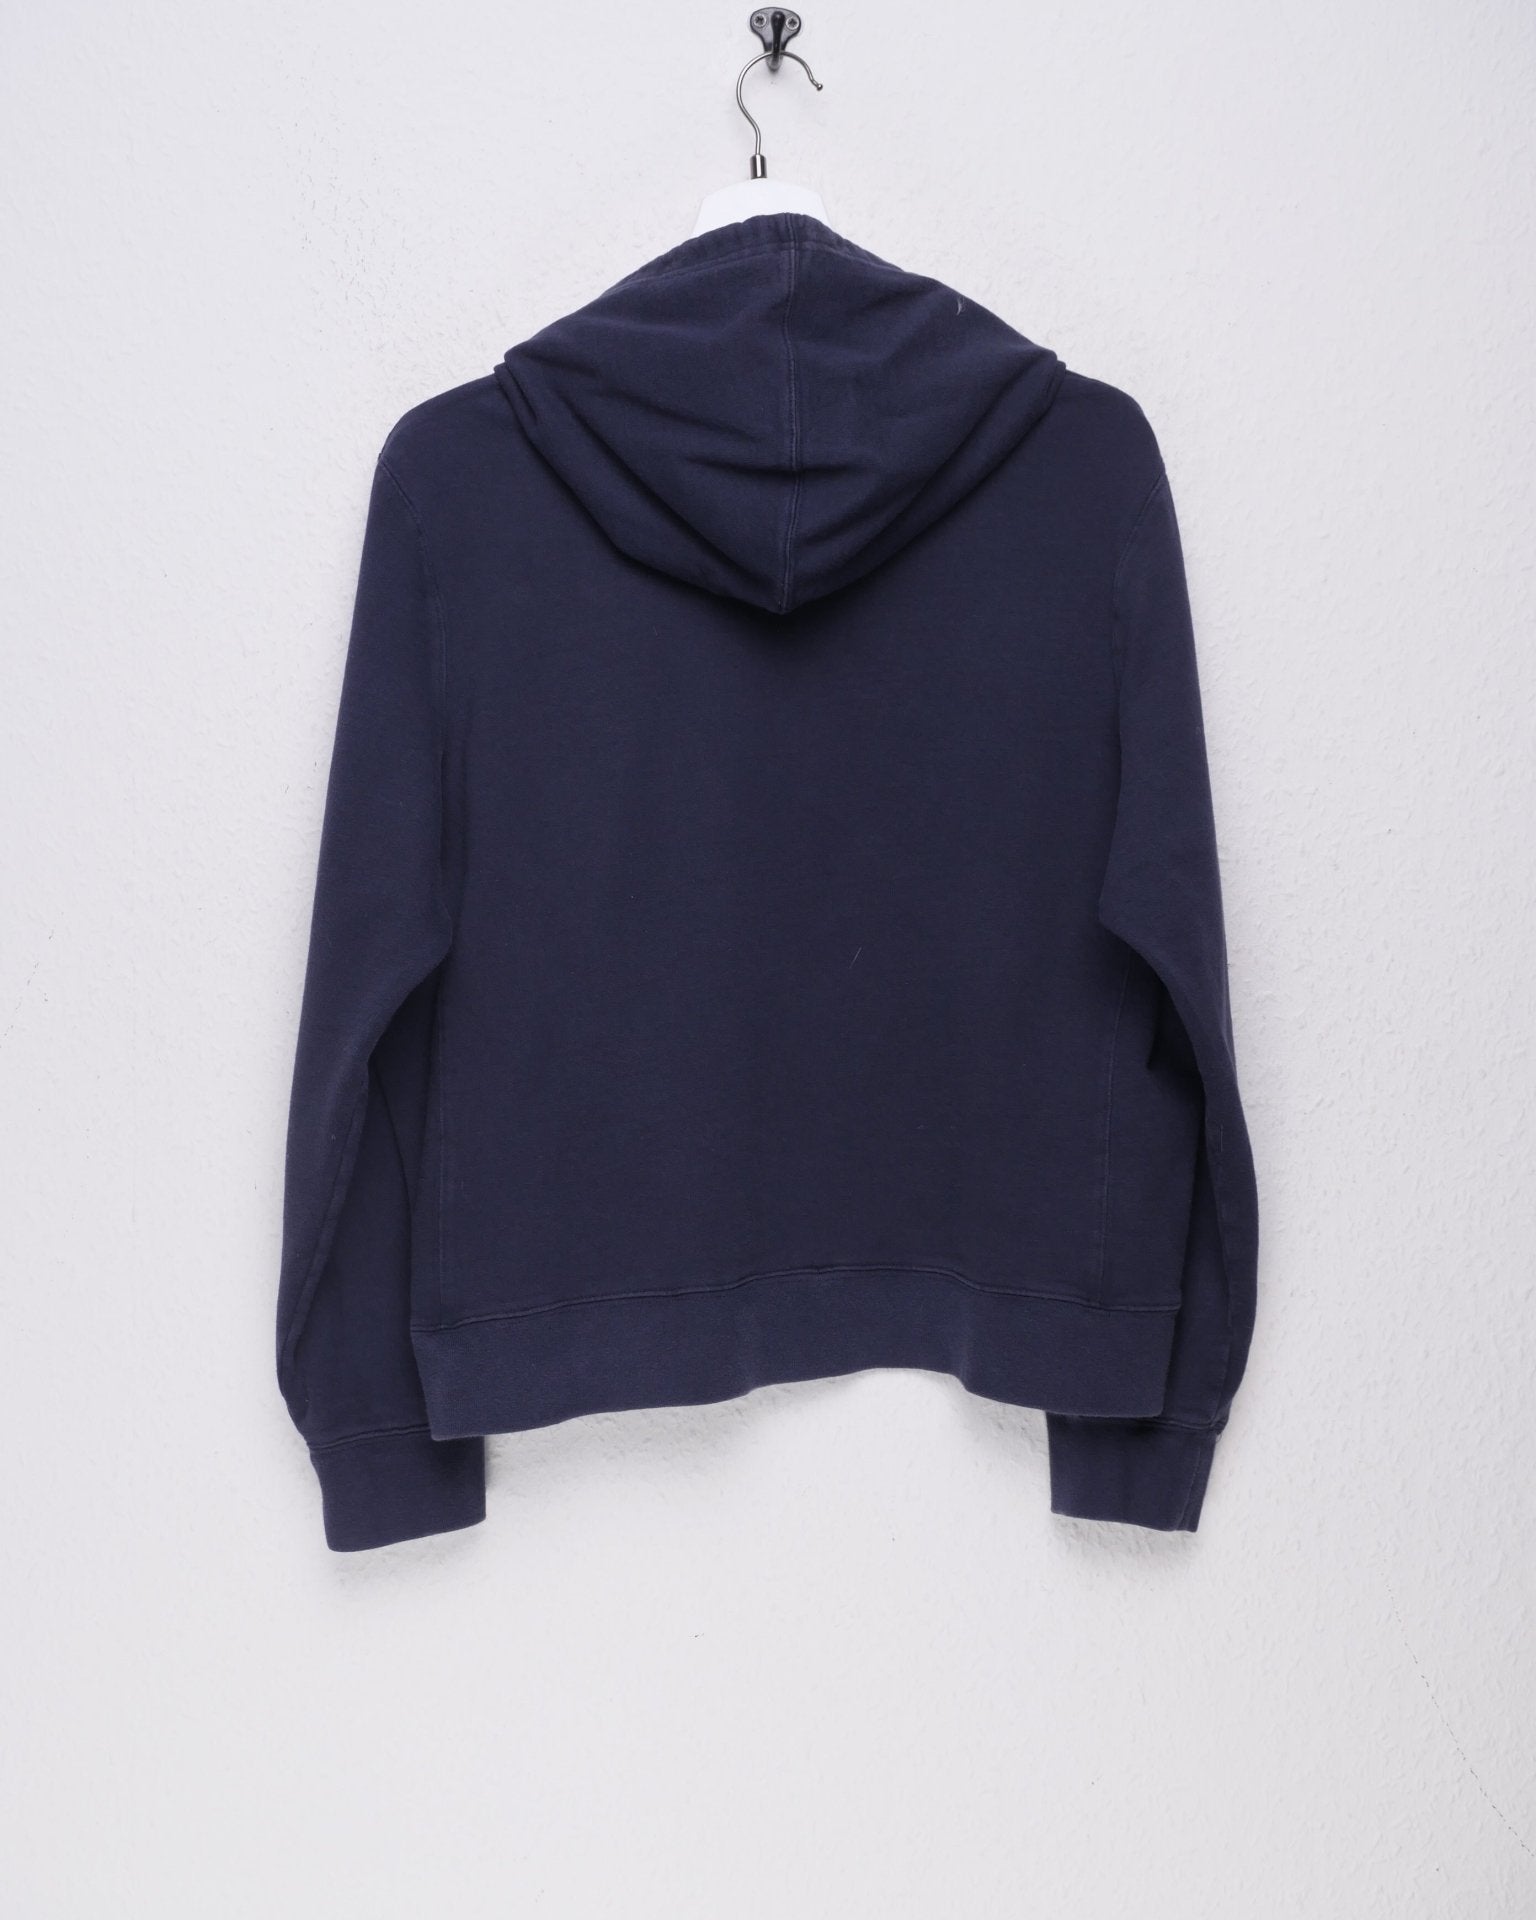 Old Navy embroidered Spellout Vintage navy Hoodie - Peeces